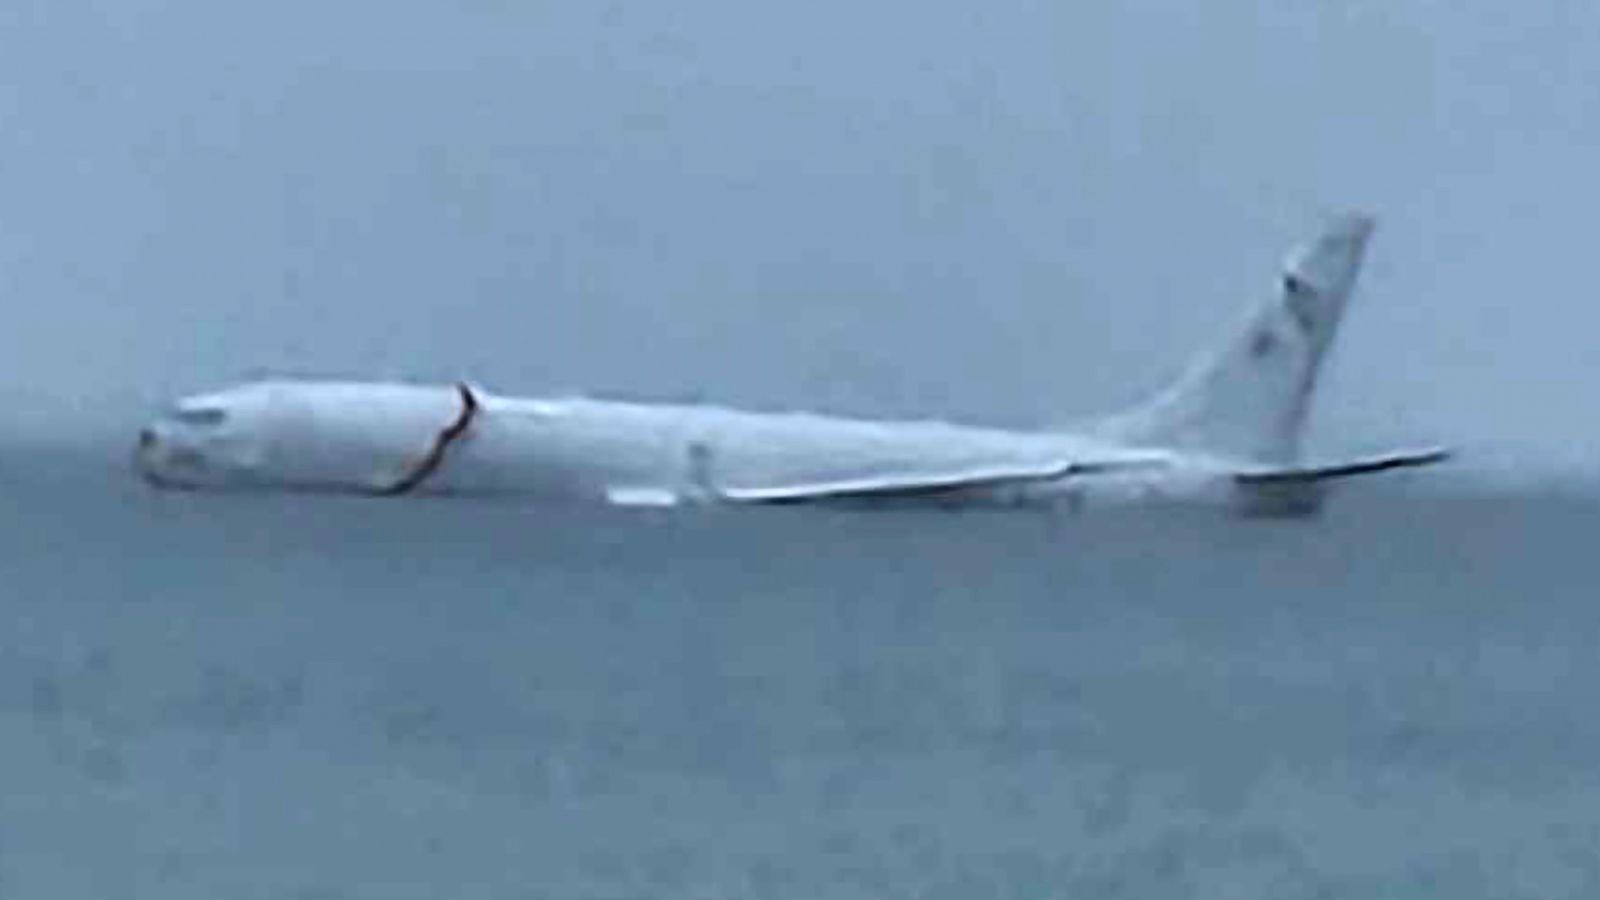 Flight data recorder removed from US navy surveillance plane that overshot runway and landed in water